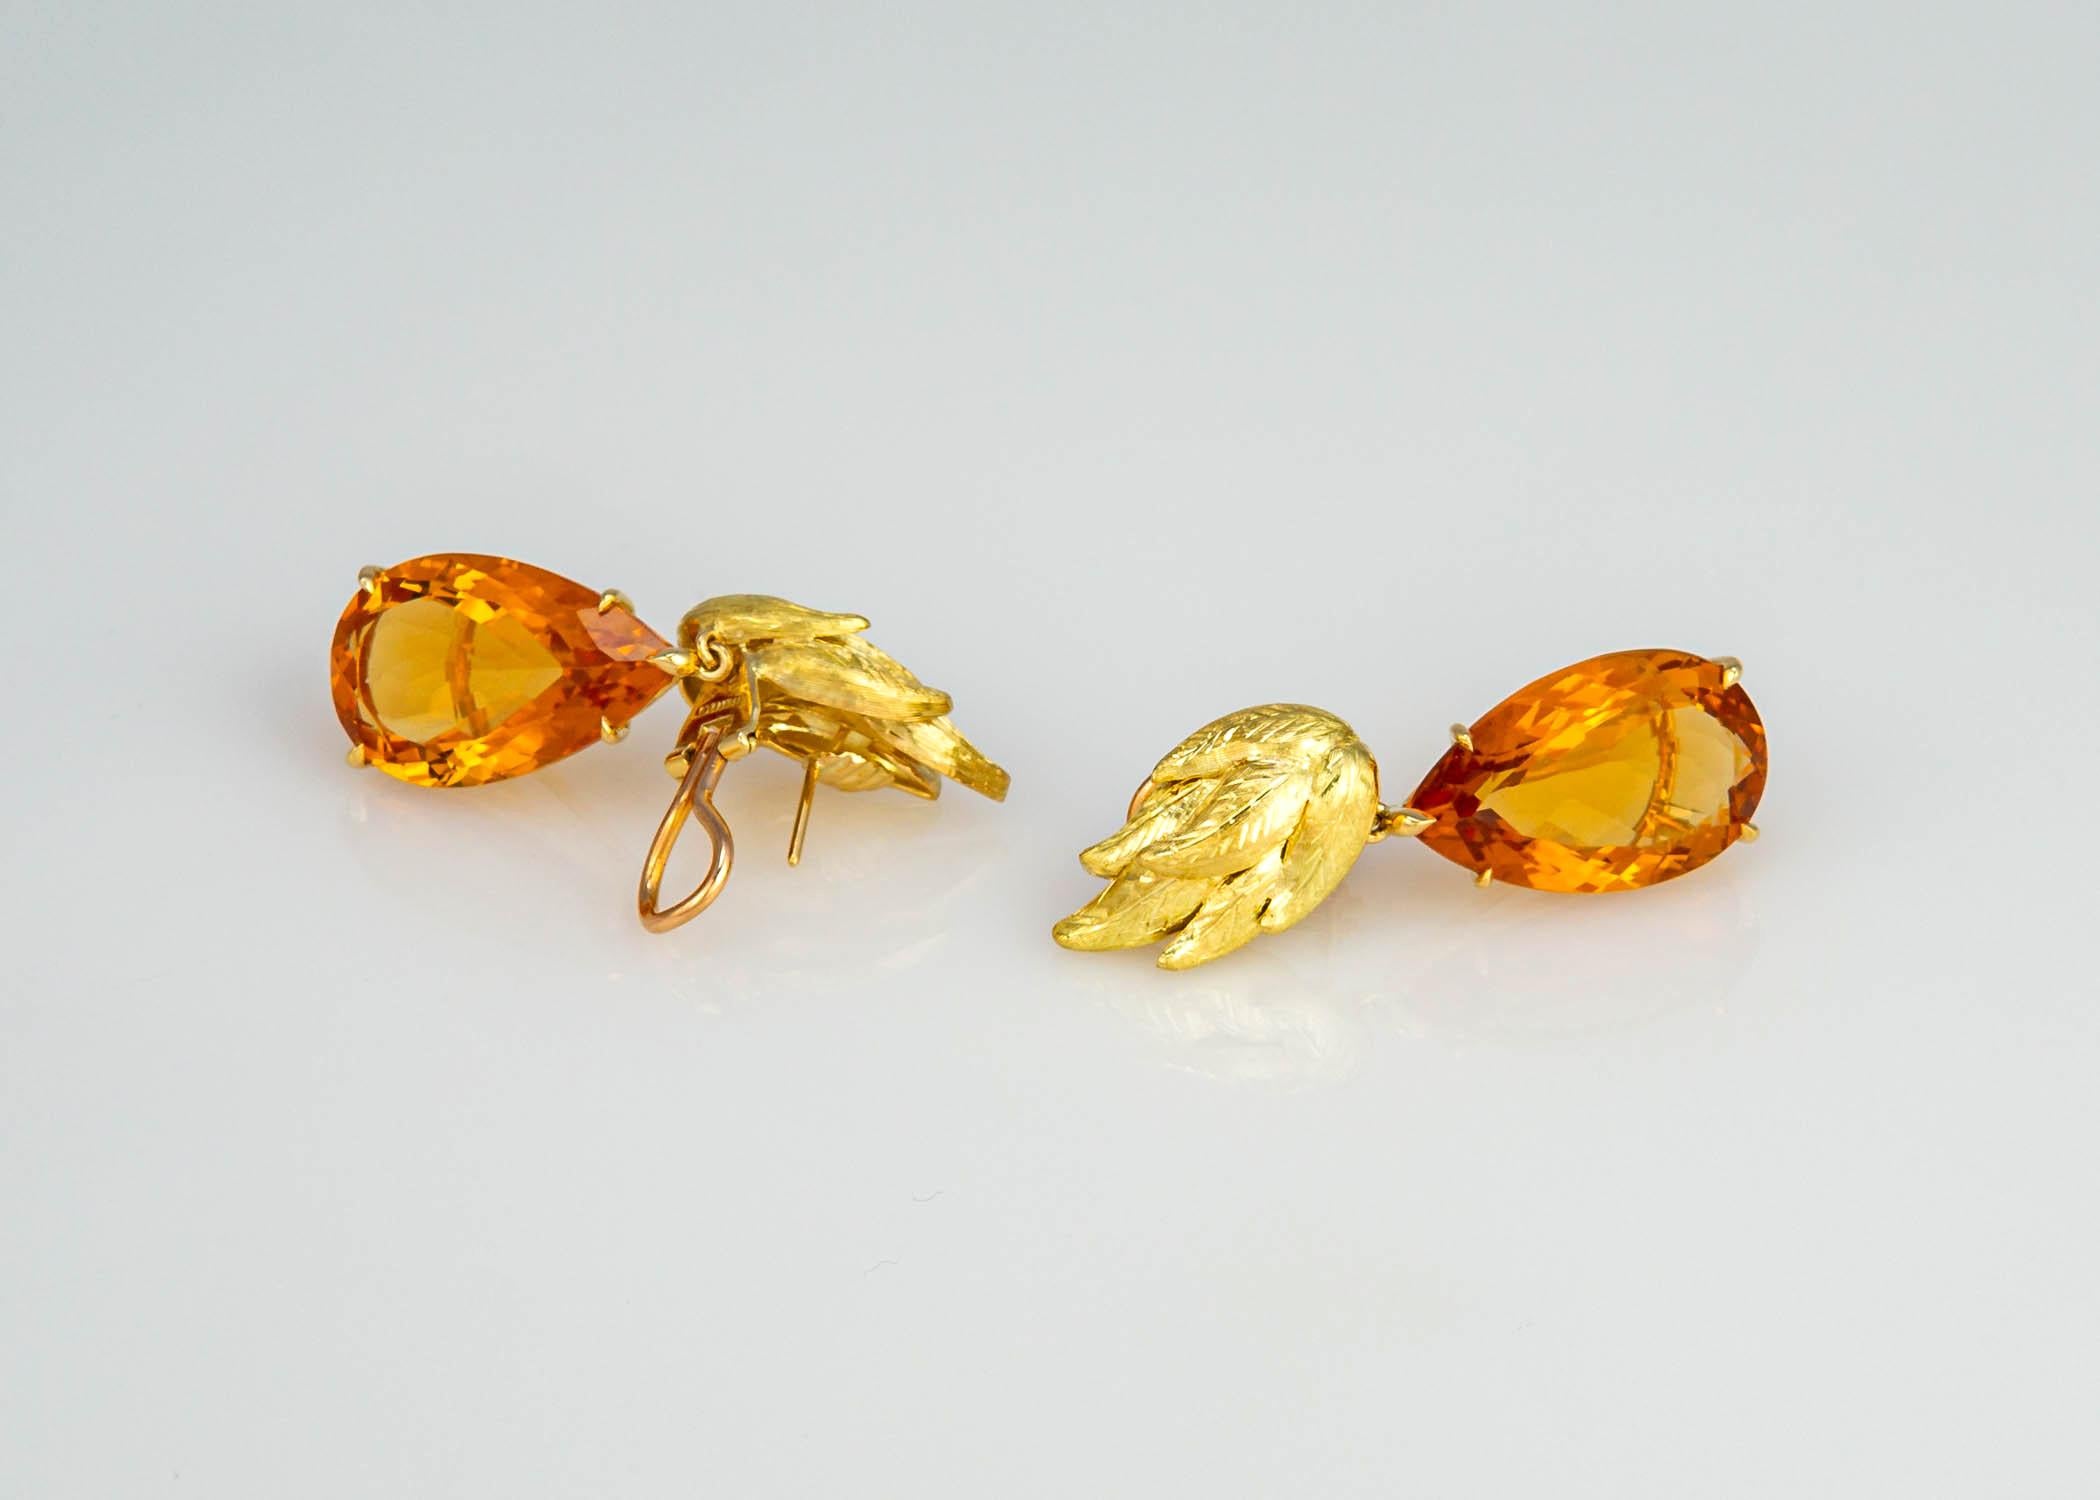 A fabulous vintage example of Tiffany & Co. style and quality. A design to dress up or wear casual. A beautifully detailed leaf motif top and a matched pair of rich honey colored citrines totaling 42 carats. Two inches in length. 